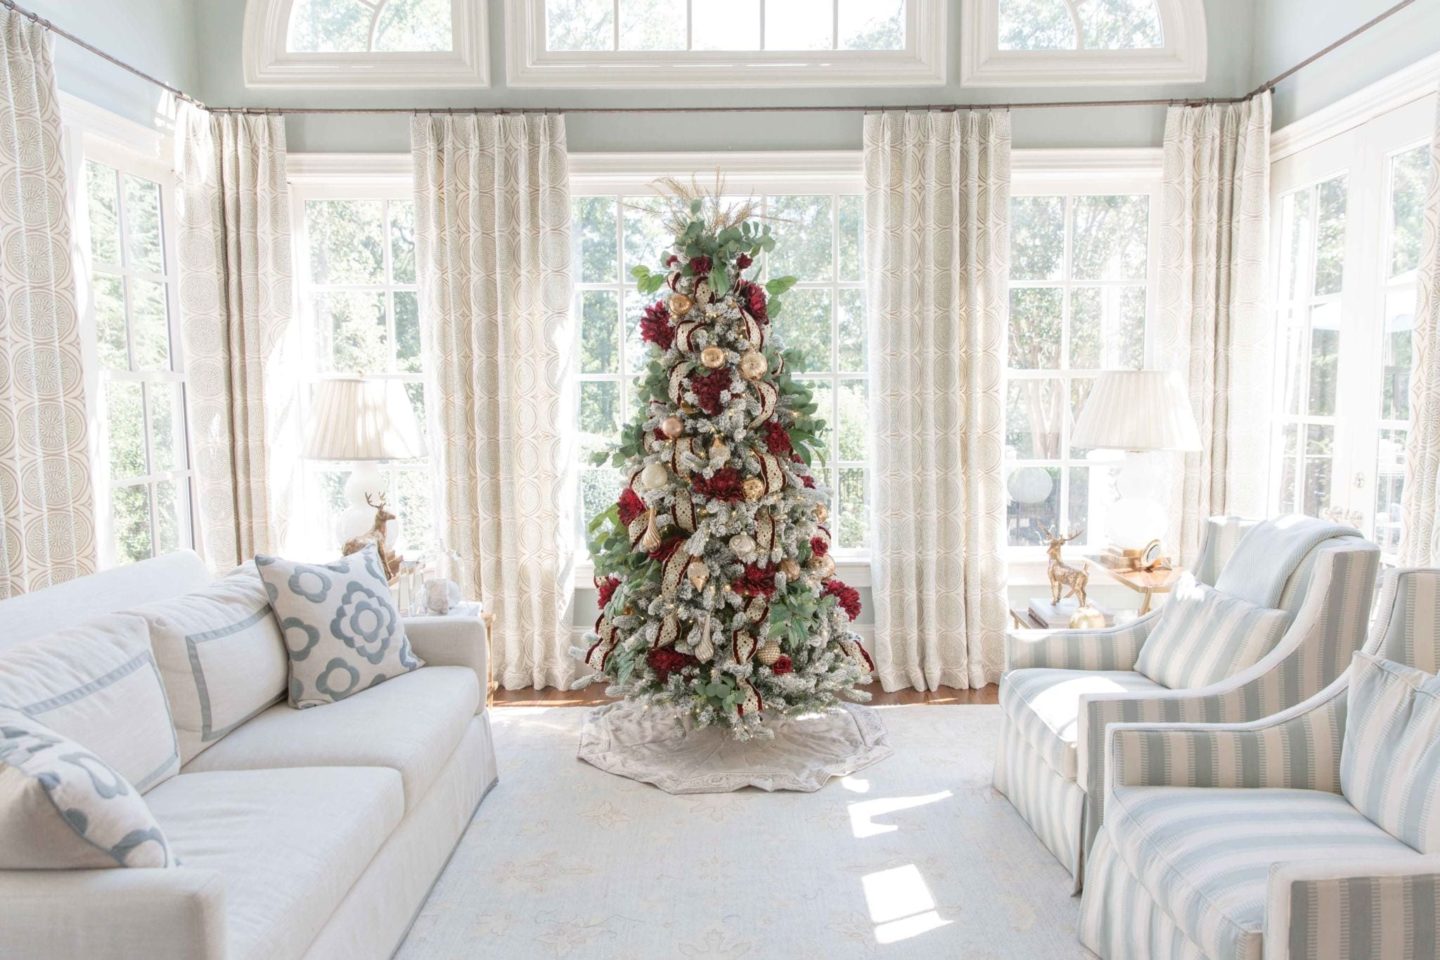 Red and gold tree in a light blue sunroom with green tree sprays.